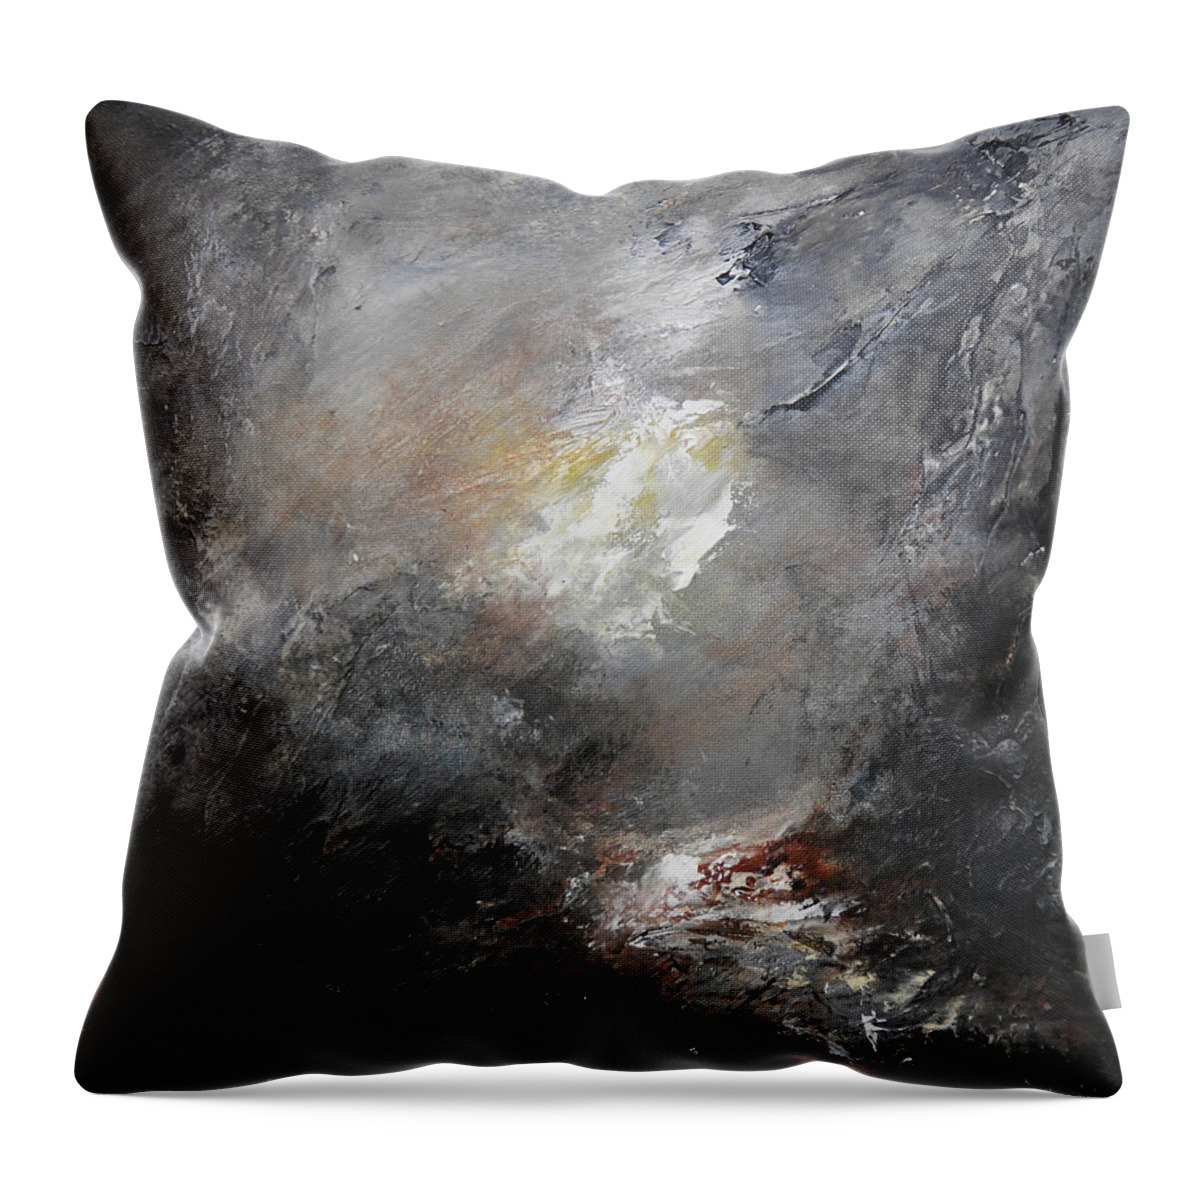 Abstract Throw Pillow featuring the painting Let There Be Light Abstract Landscape by Jai Johnson